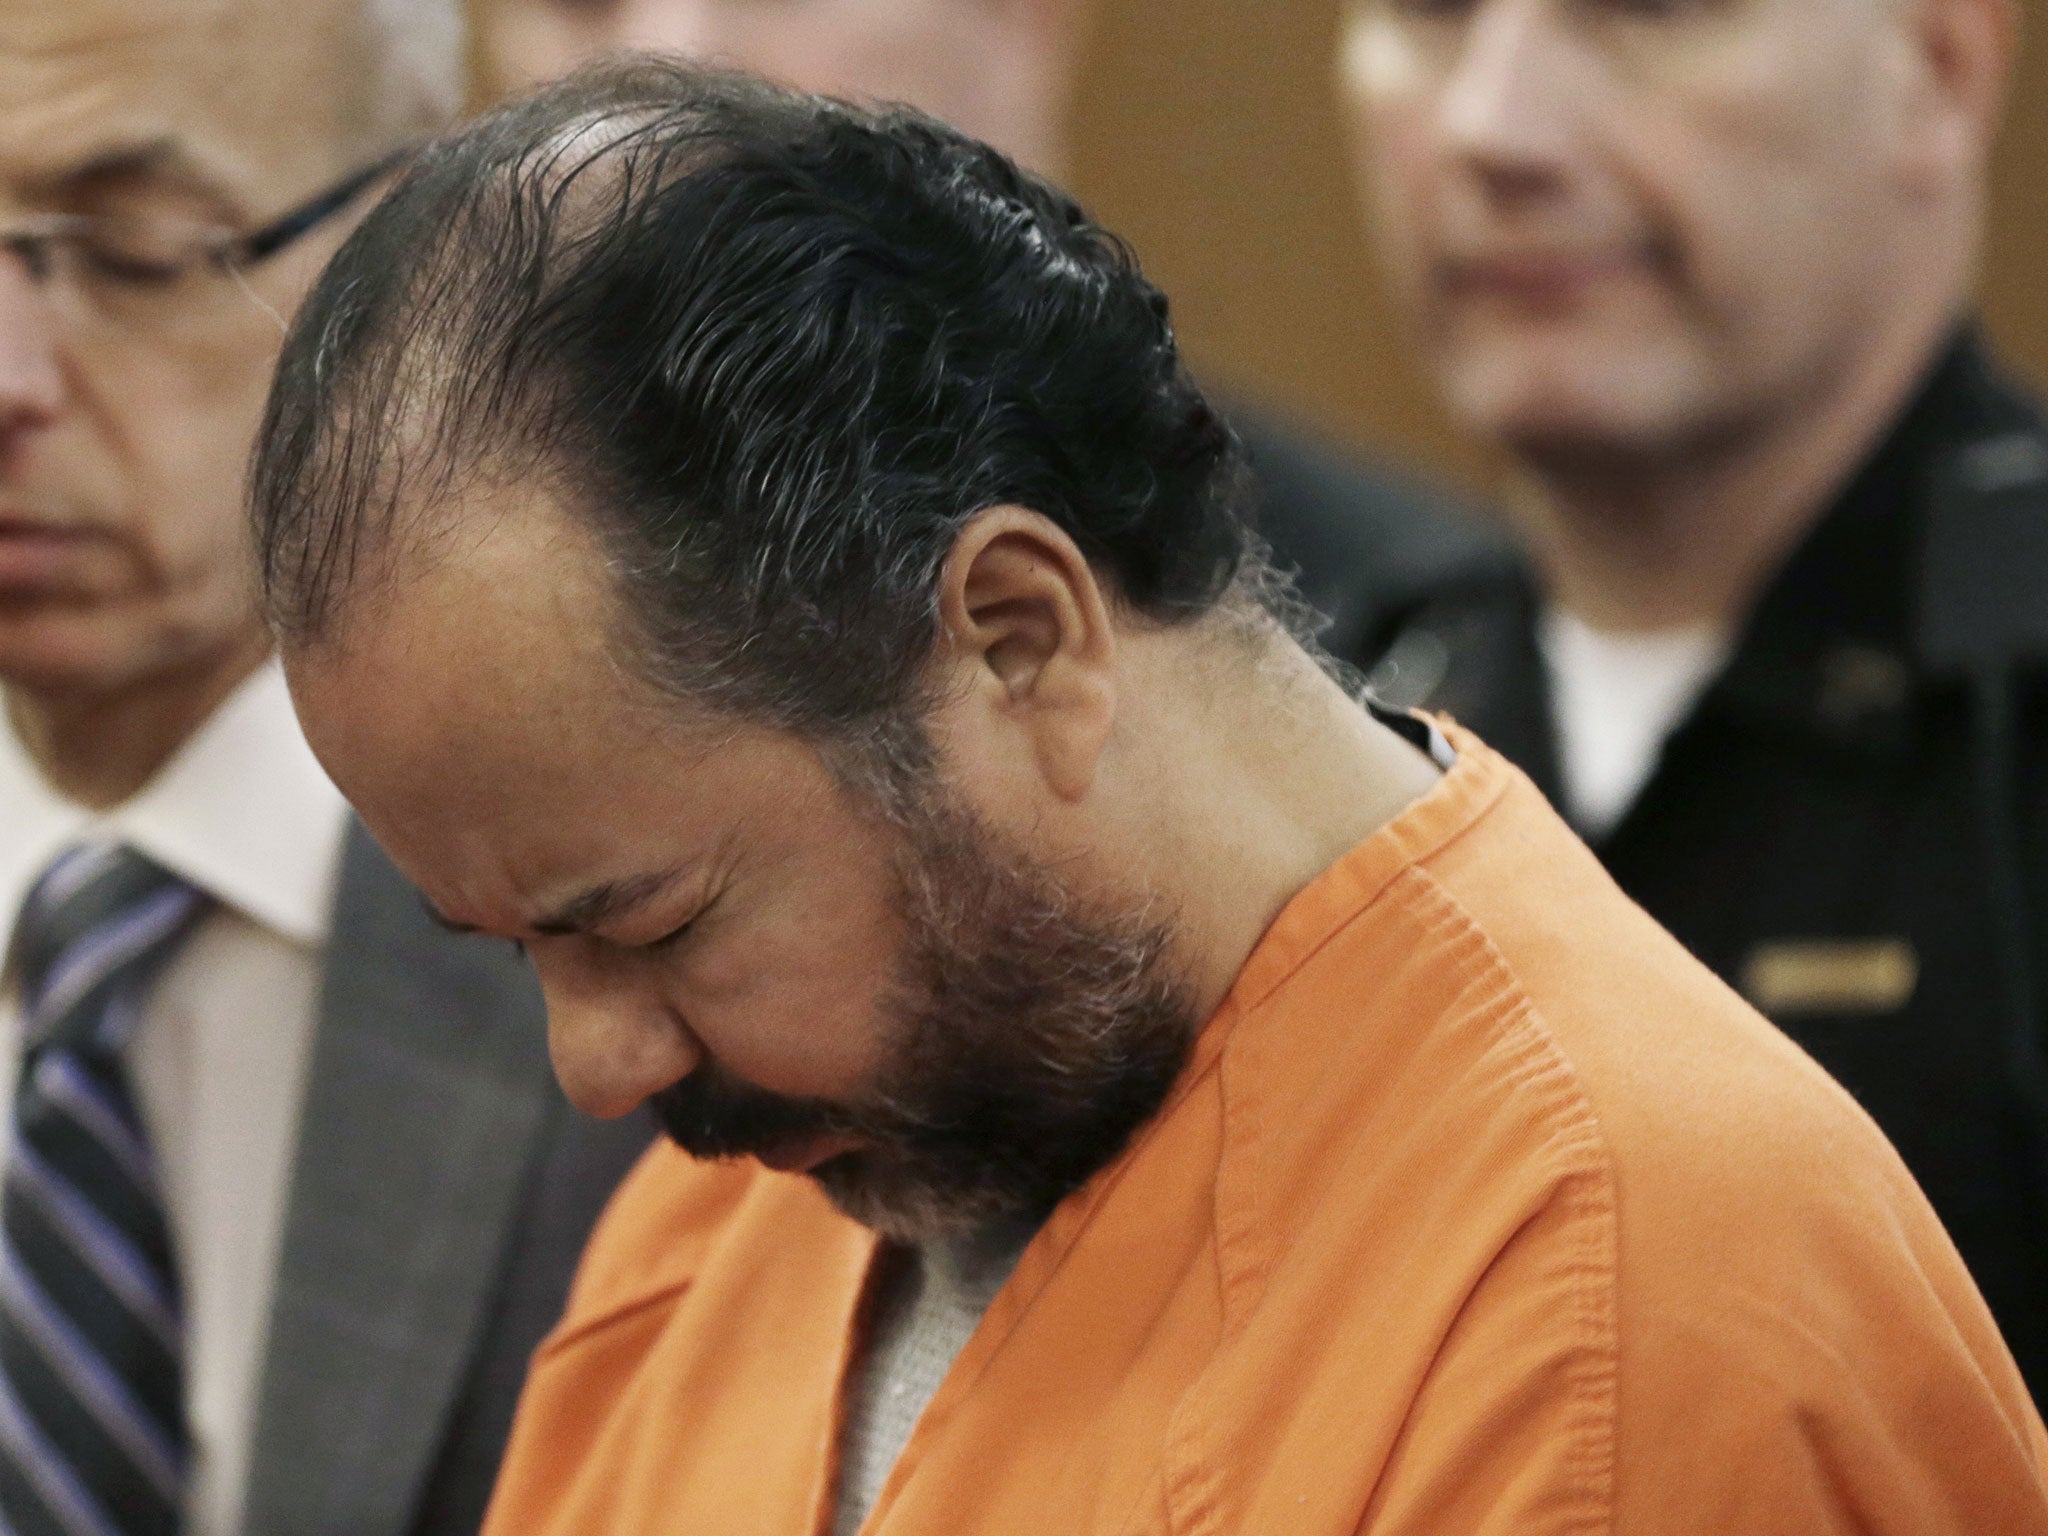 Ariel Castro is accused of holding three women captive in his home for around a decade